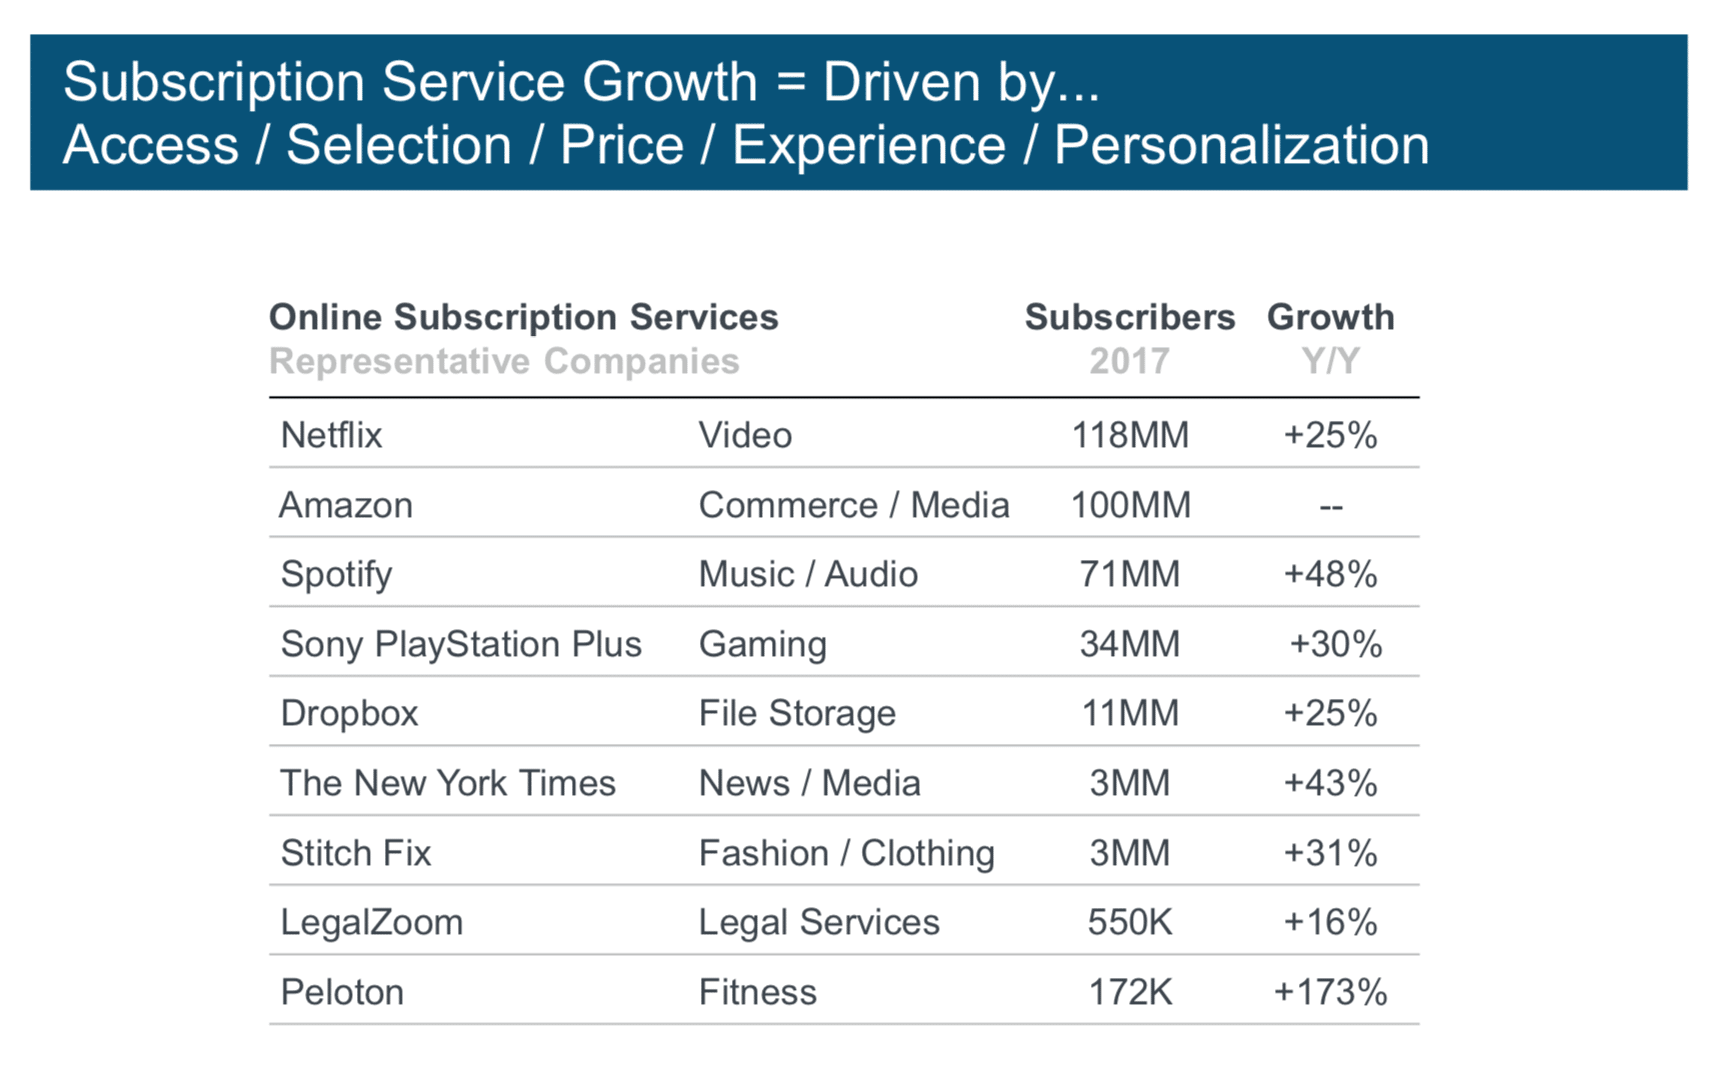 Mary Meeker's subscription service growth data